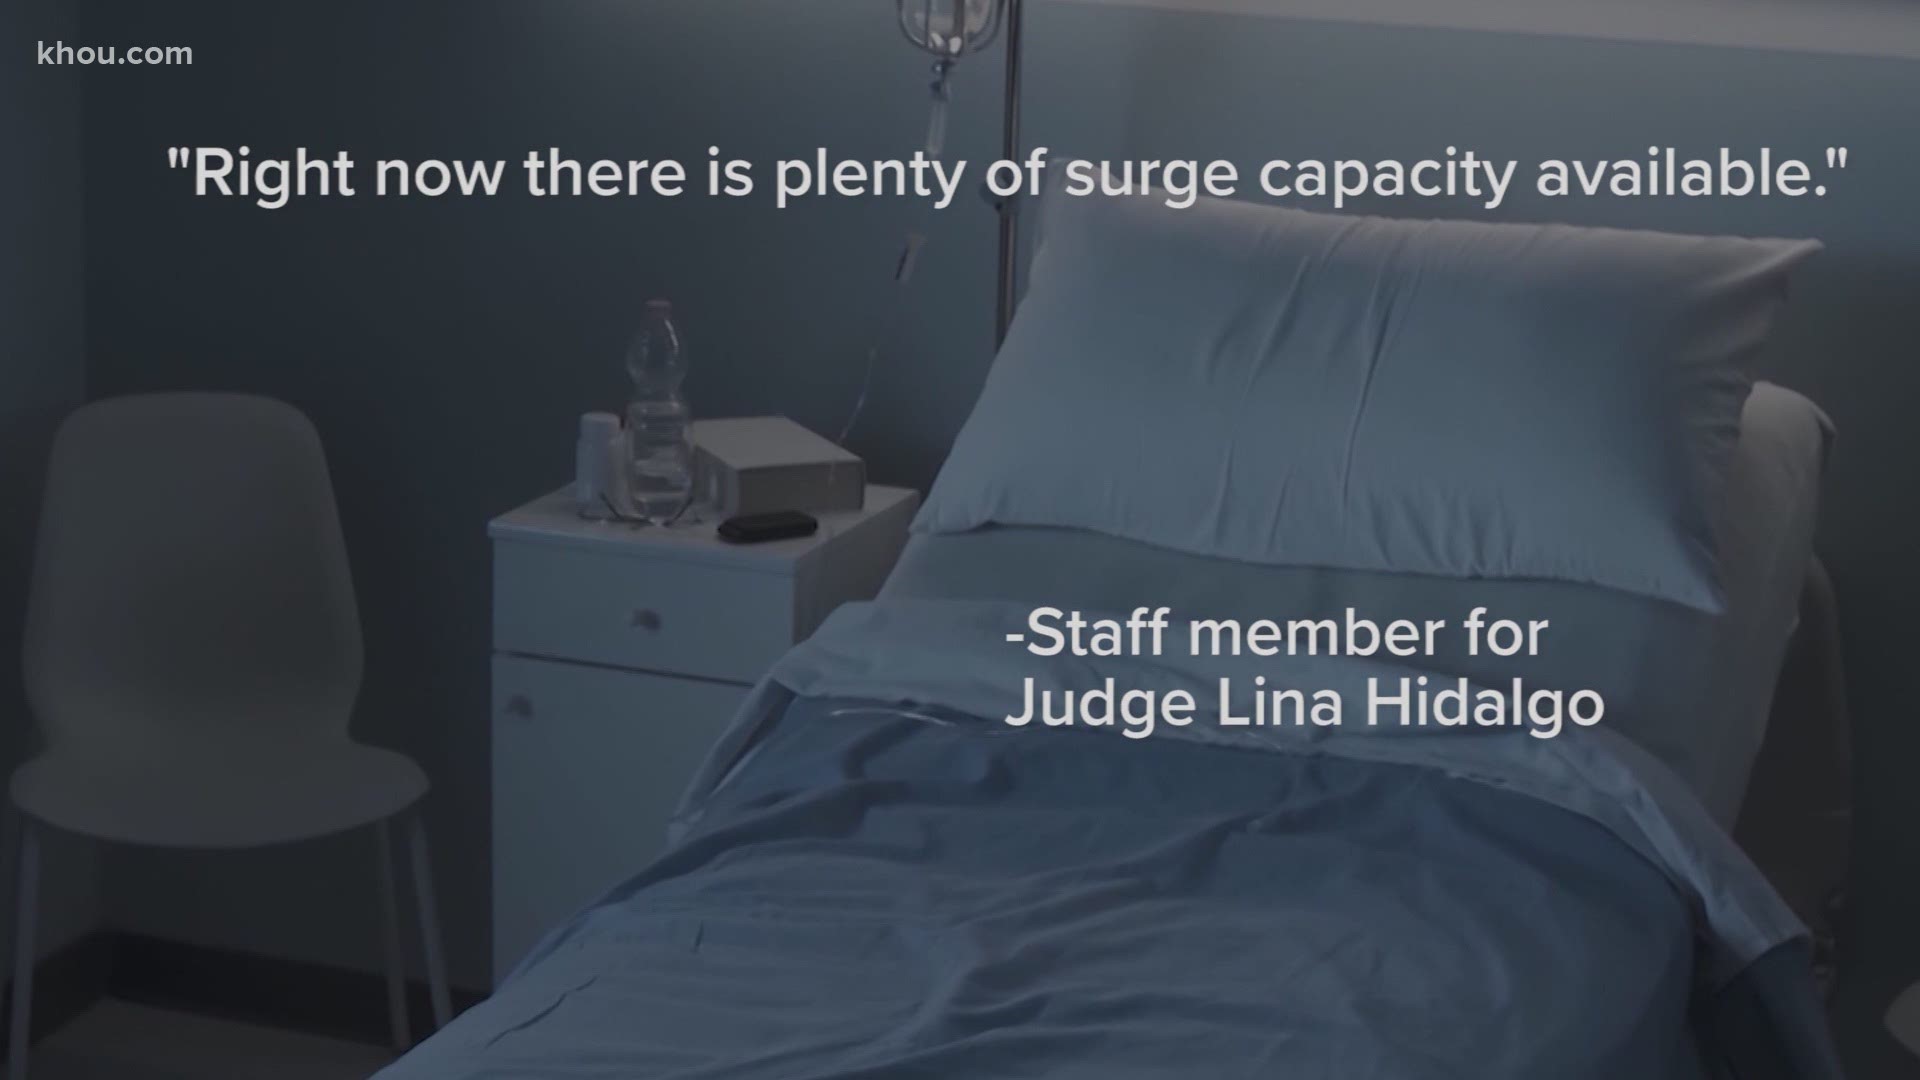 Staff for Harris Co. Judge Lina Hidalgo said their emergency shelter for COVID-19 patients is ready to deploy if needed, but they currently had no plans to do so.